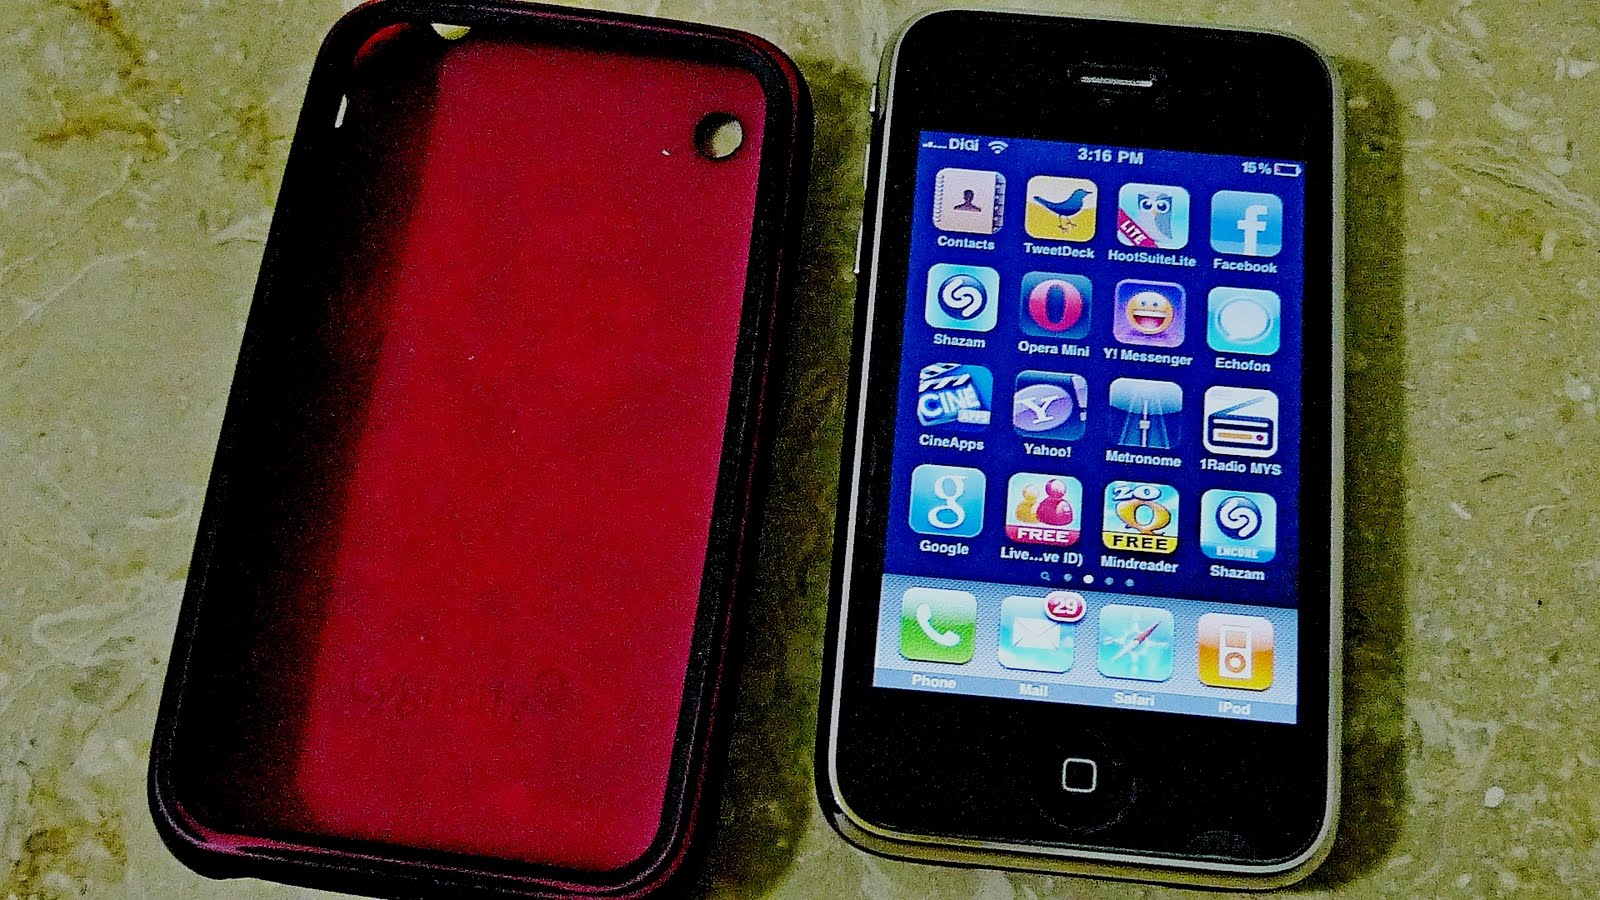 My Very First Blog: My Very First iPhone